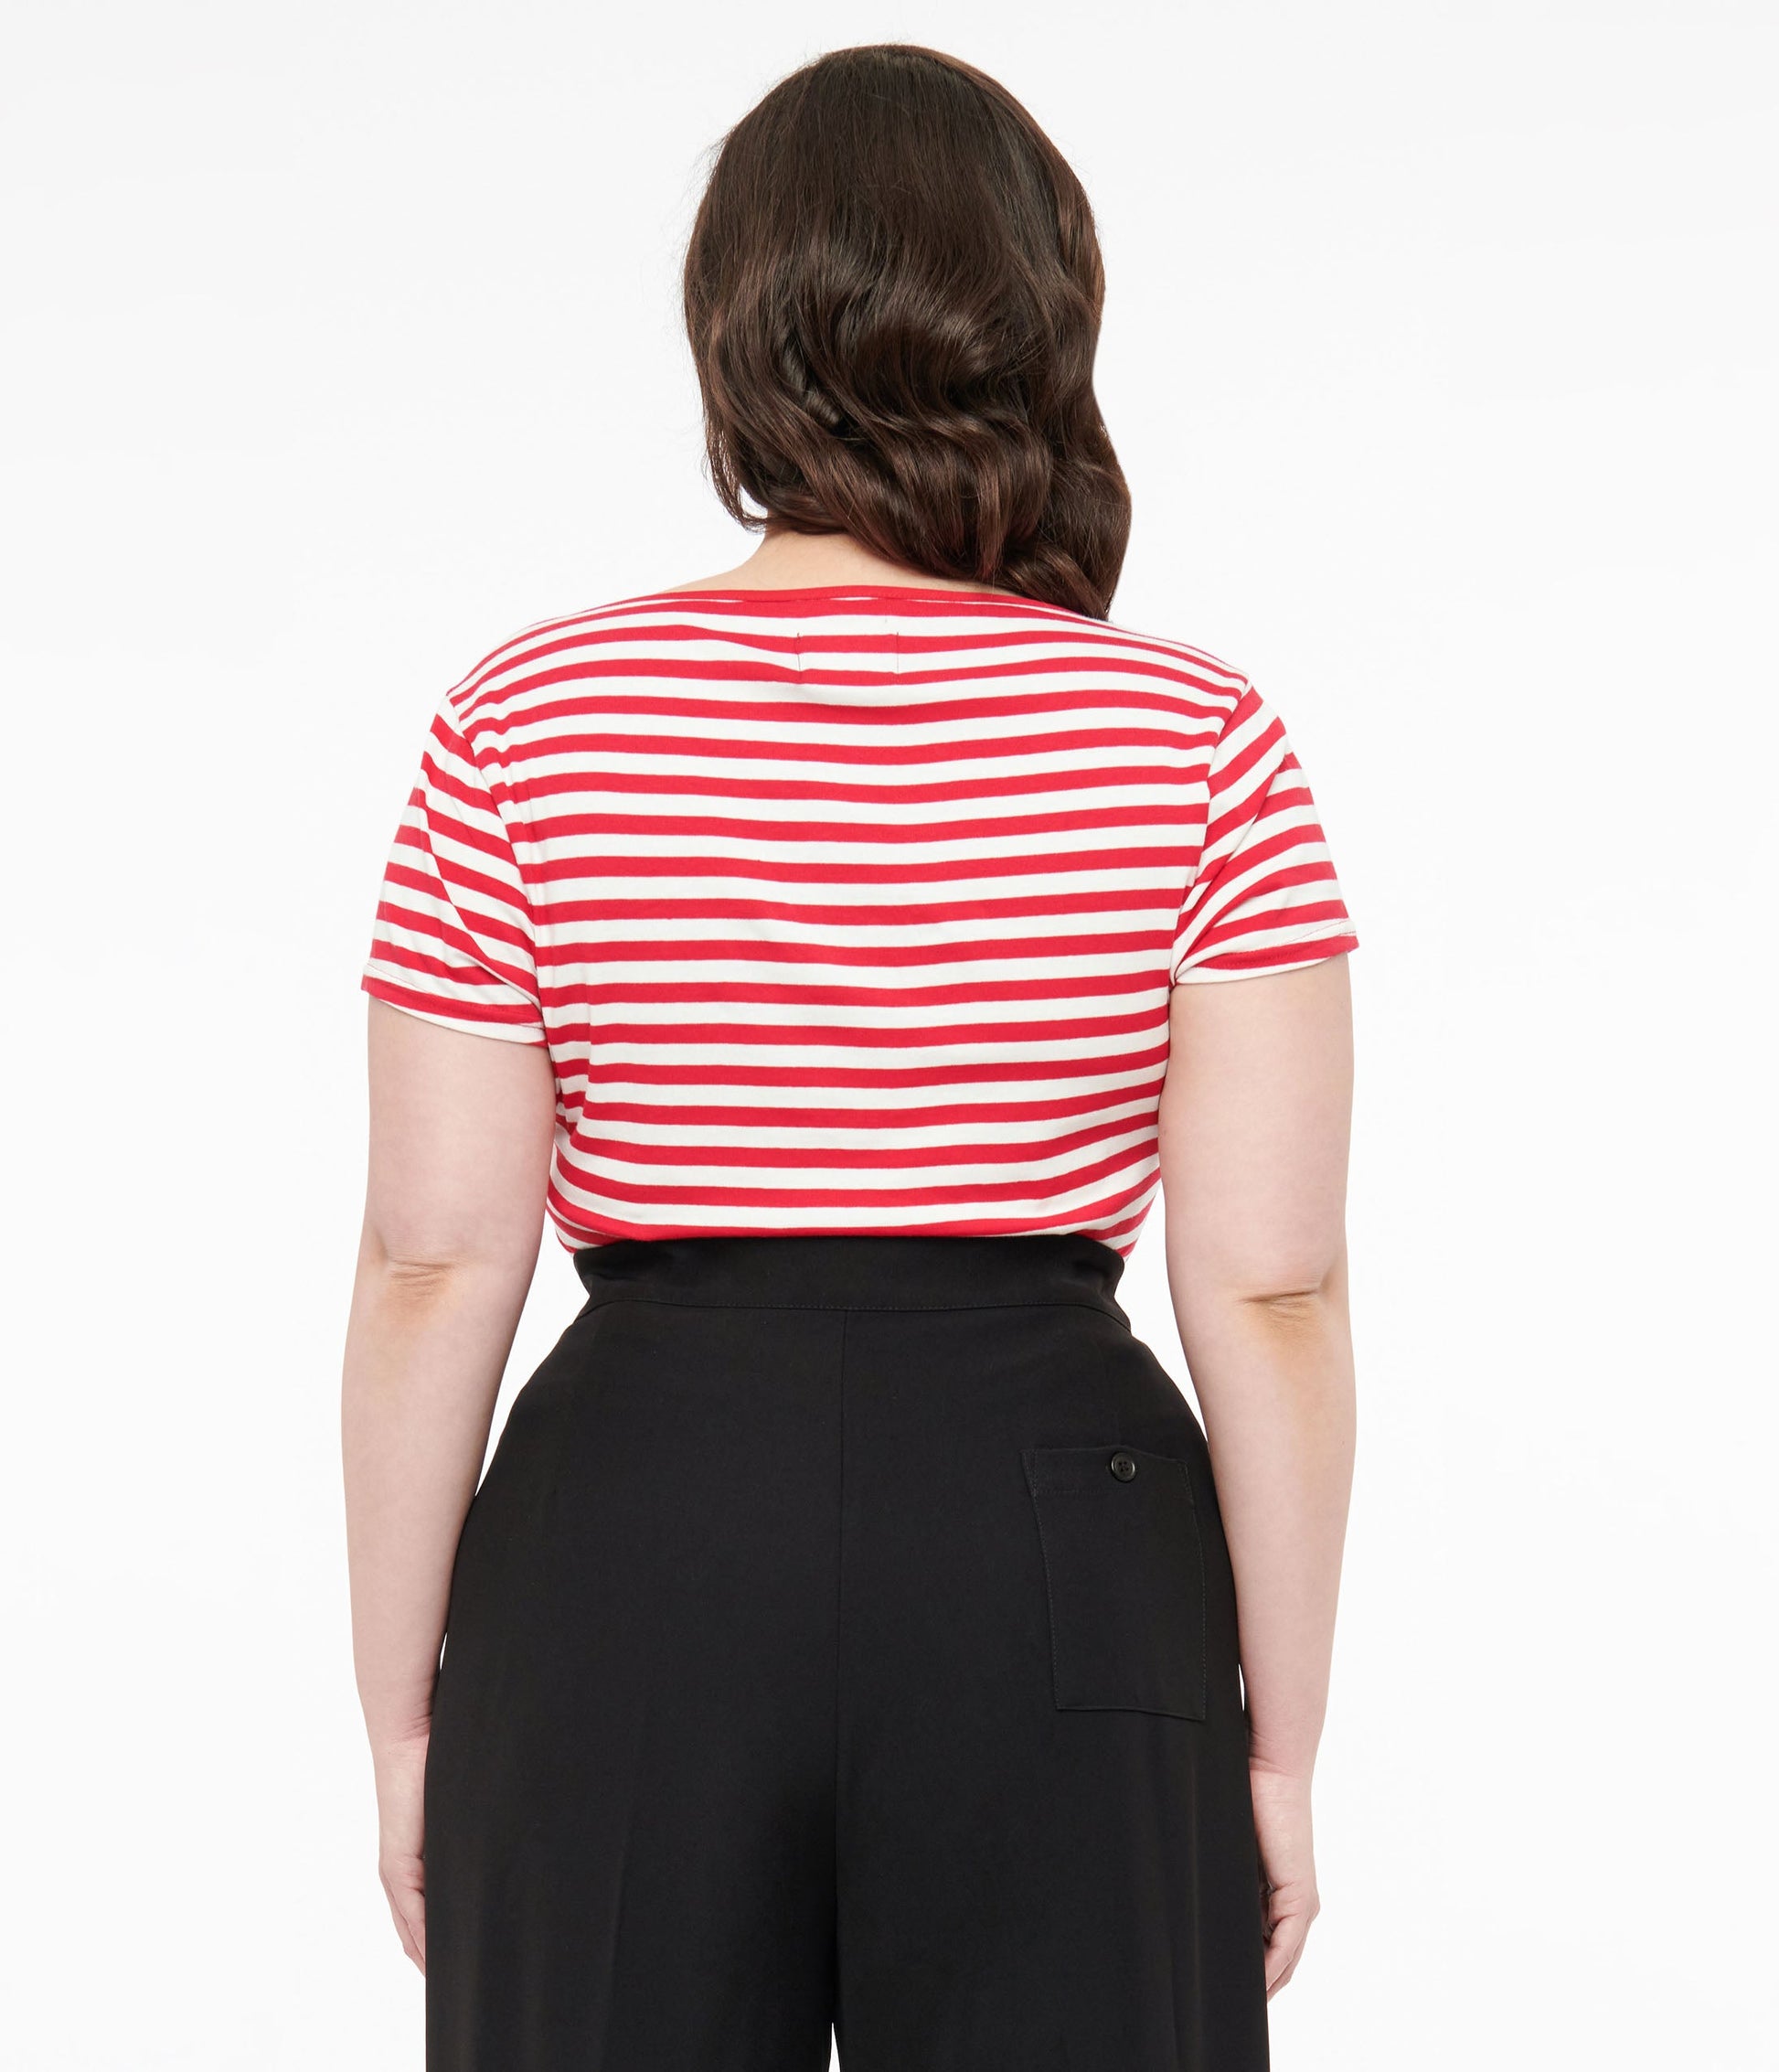 Hell Bunny Plus Size 1940s Red & White Stripe Cotton Kit Top - Unique Vintage - Womens, TOPS, WOVEN TOPS